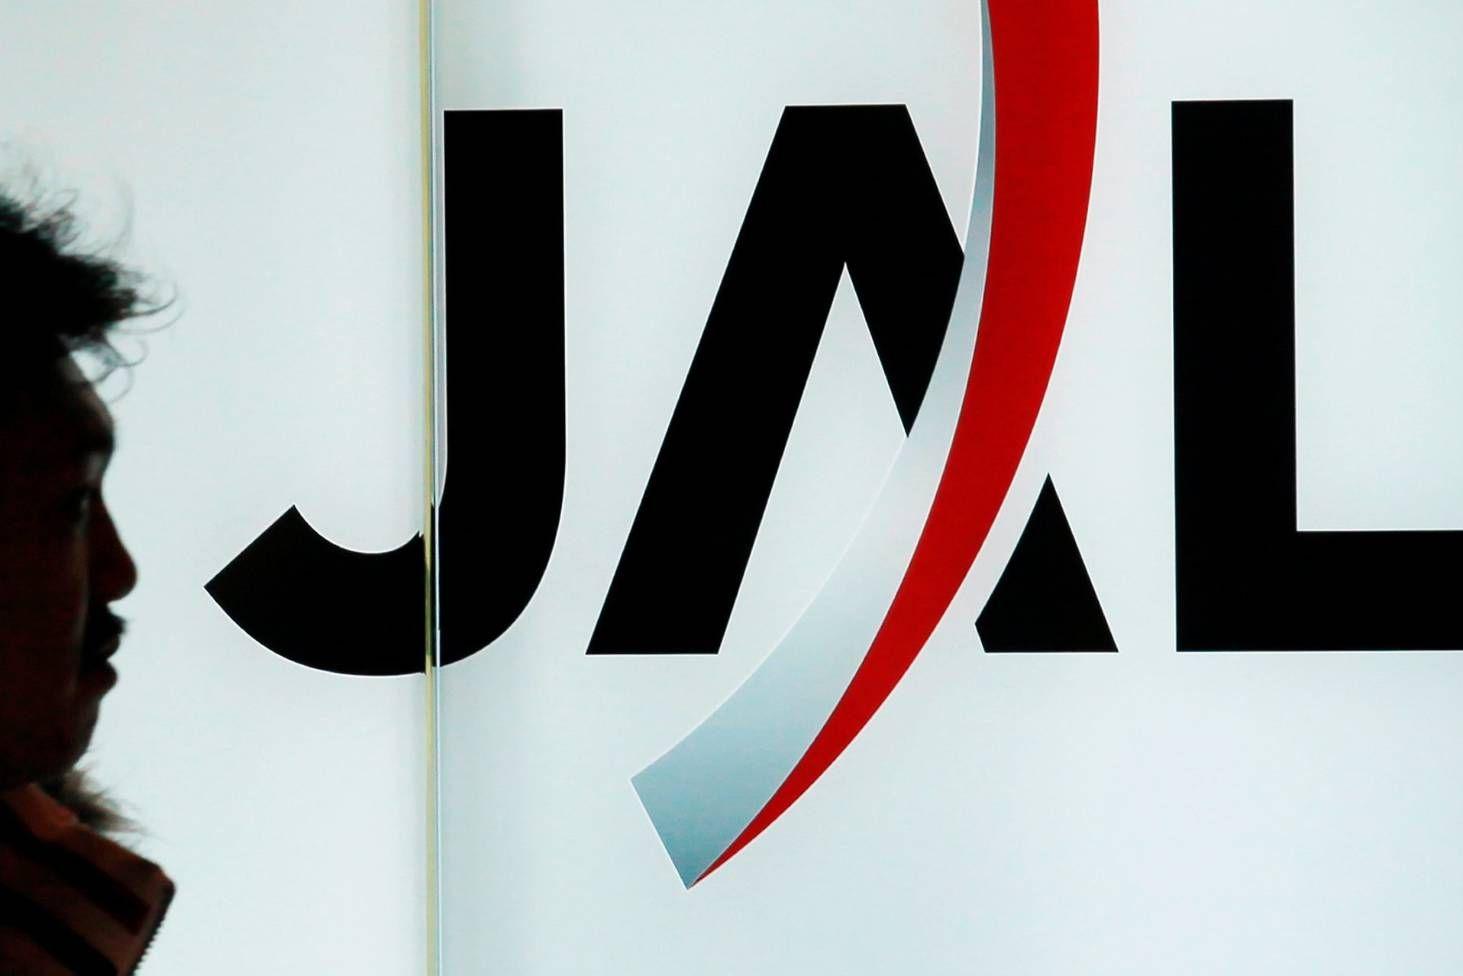 PANTHR Jal Logo - Bosses at Japan Airlines docked pay after flight attendant consumed